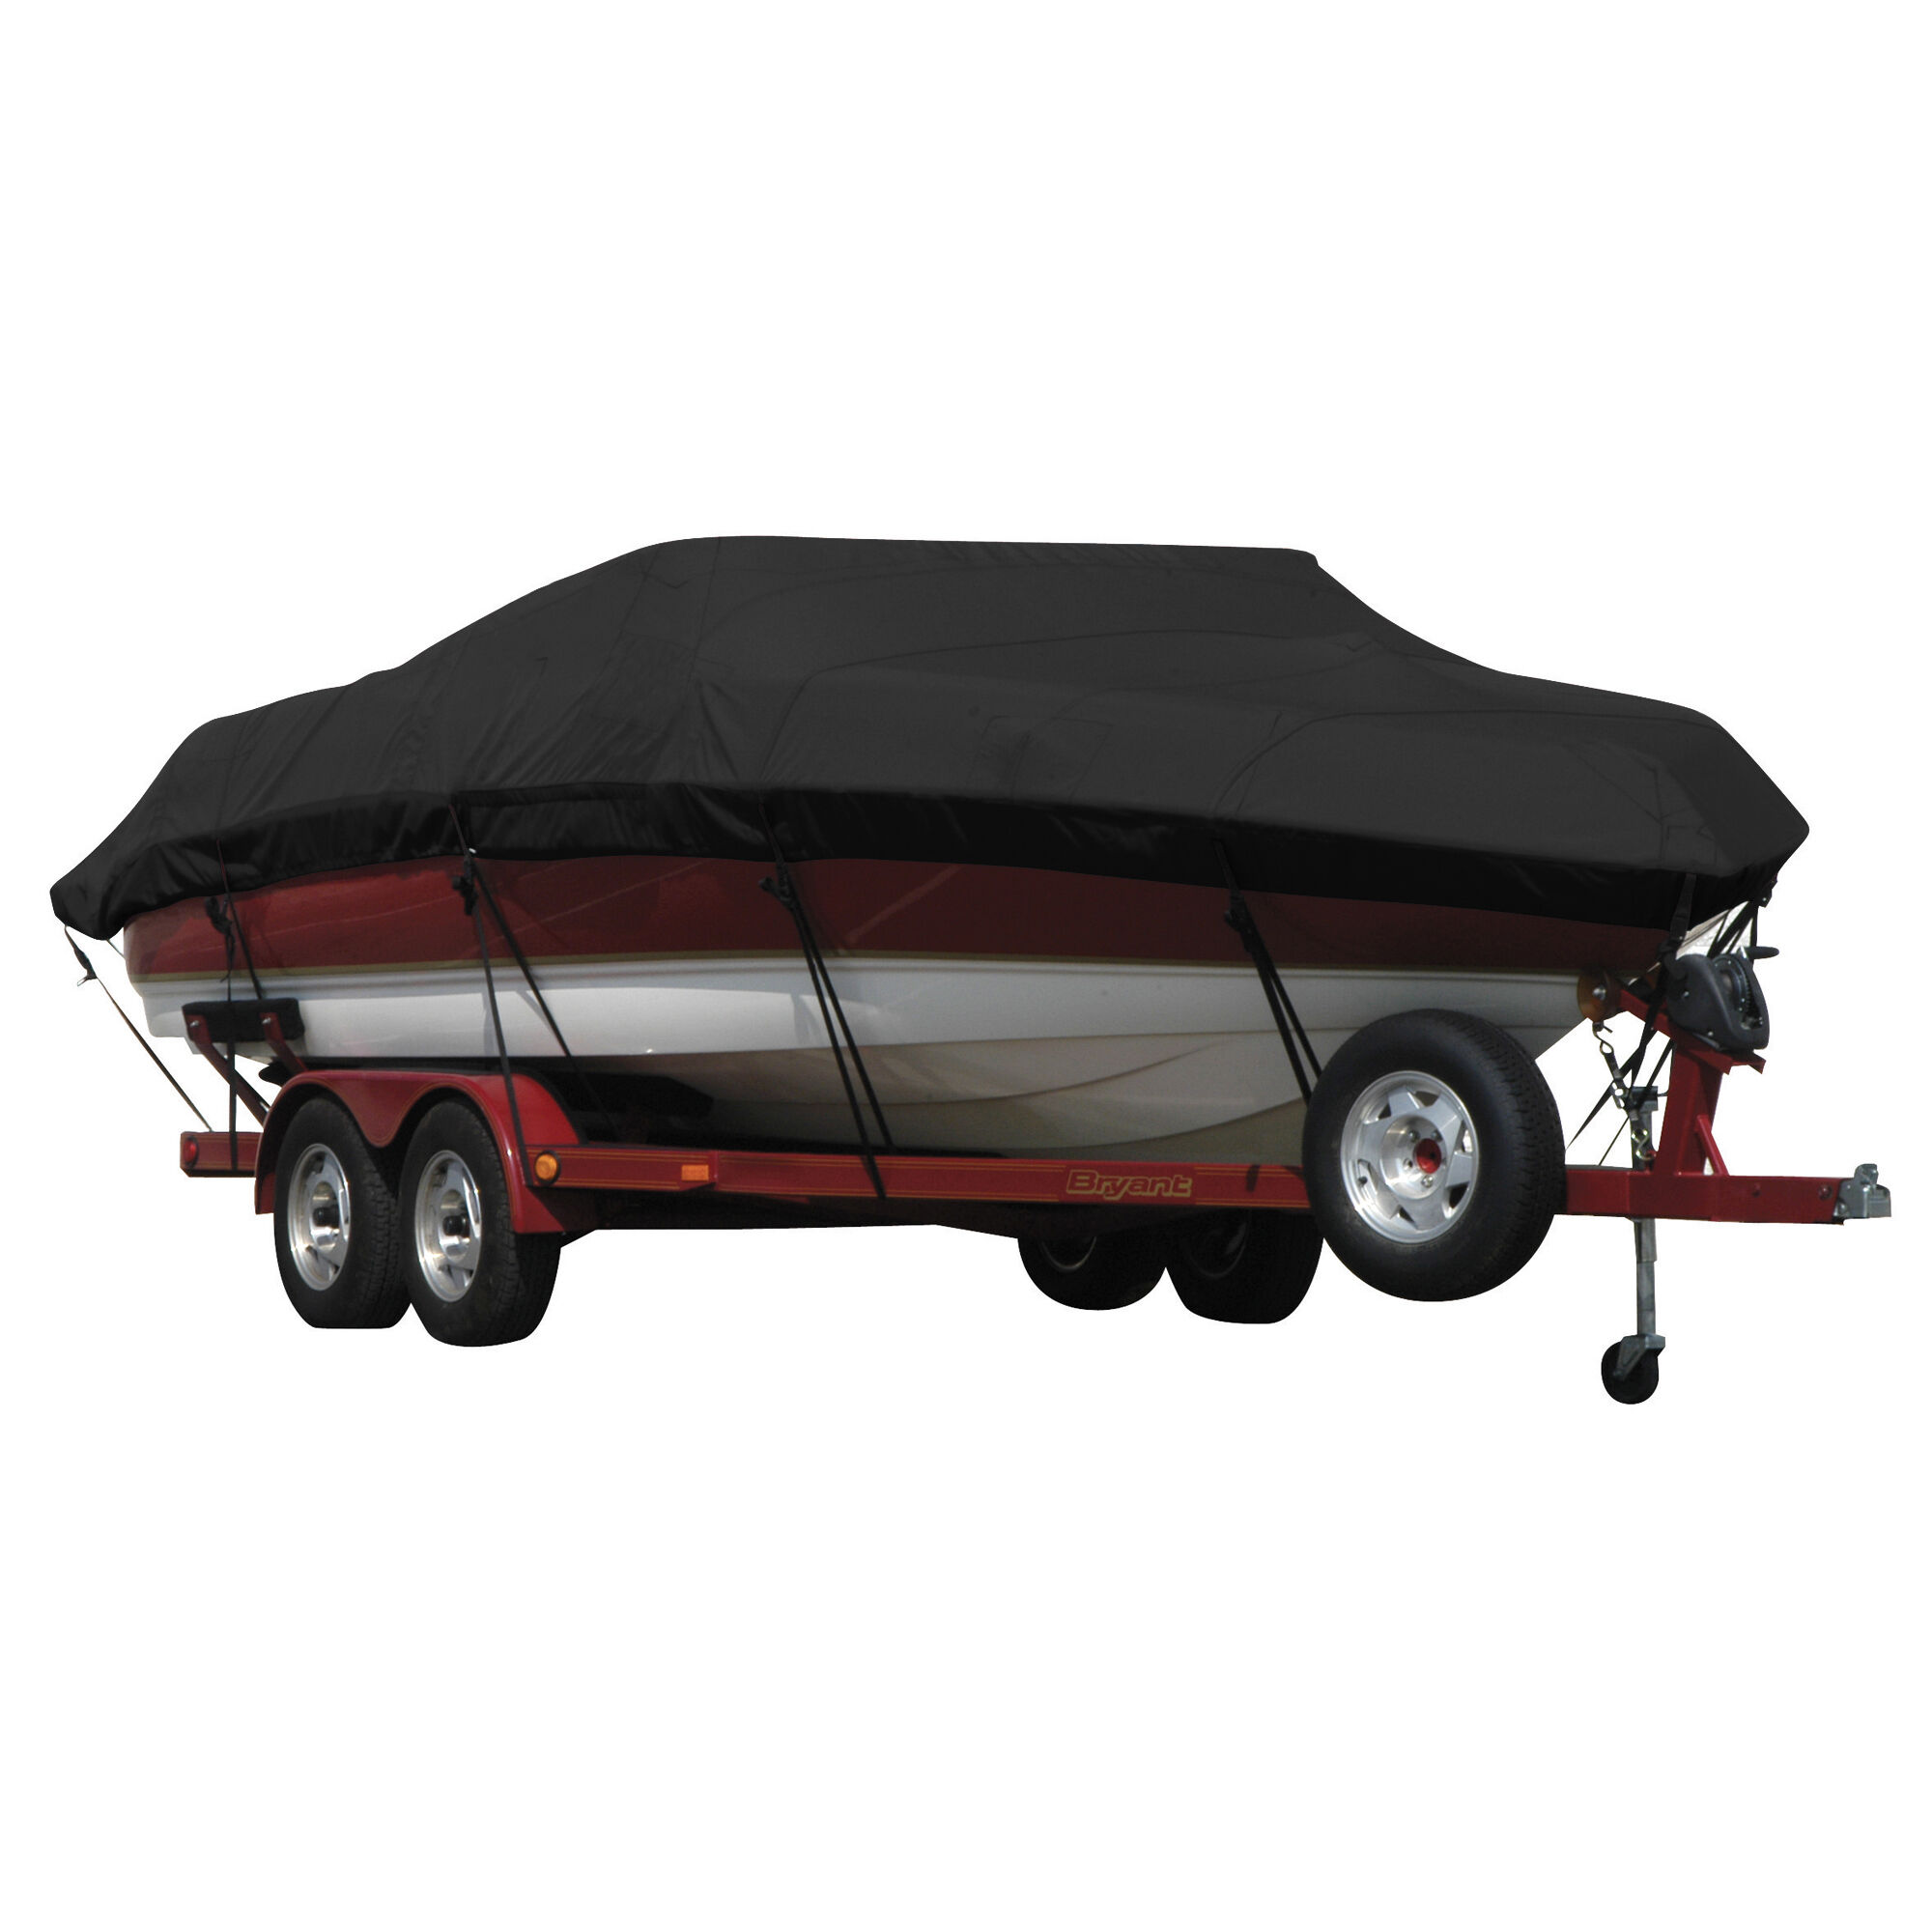 Covermate Exact Fit Sunbrella Boat Cover For Alumacraft Crappie Deluxe w/ Trolling Motor/Stick Steer in Black